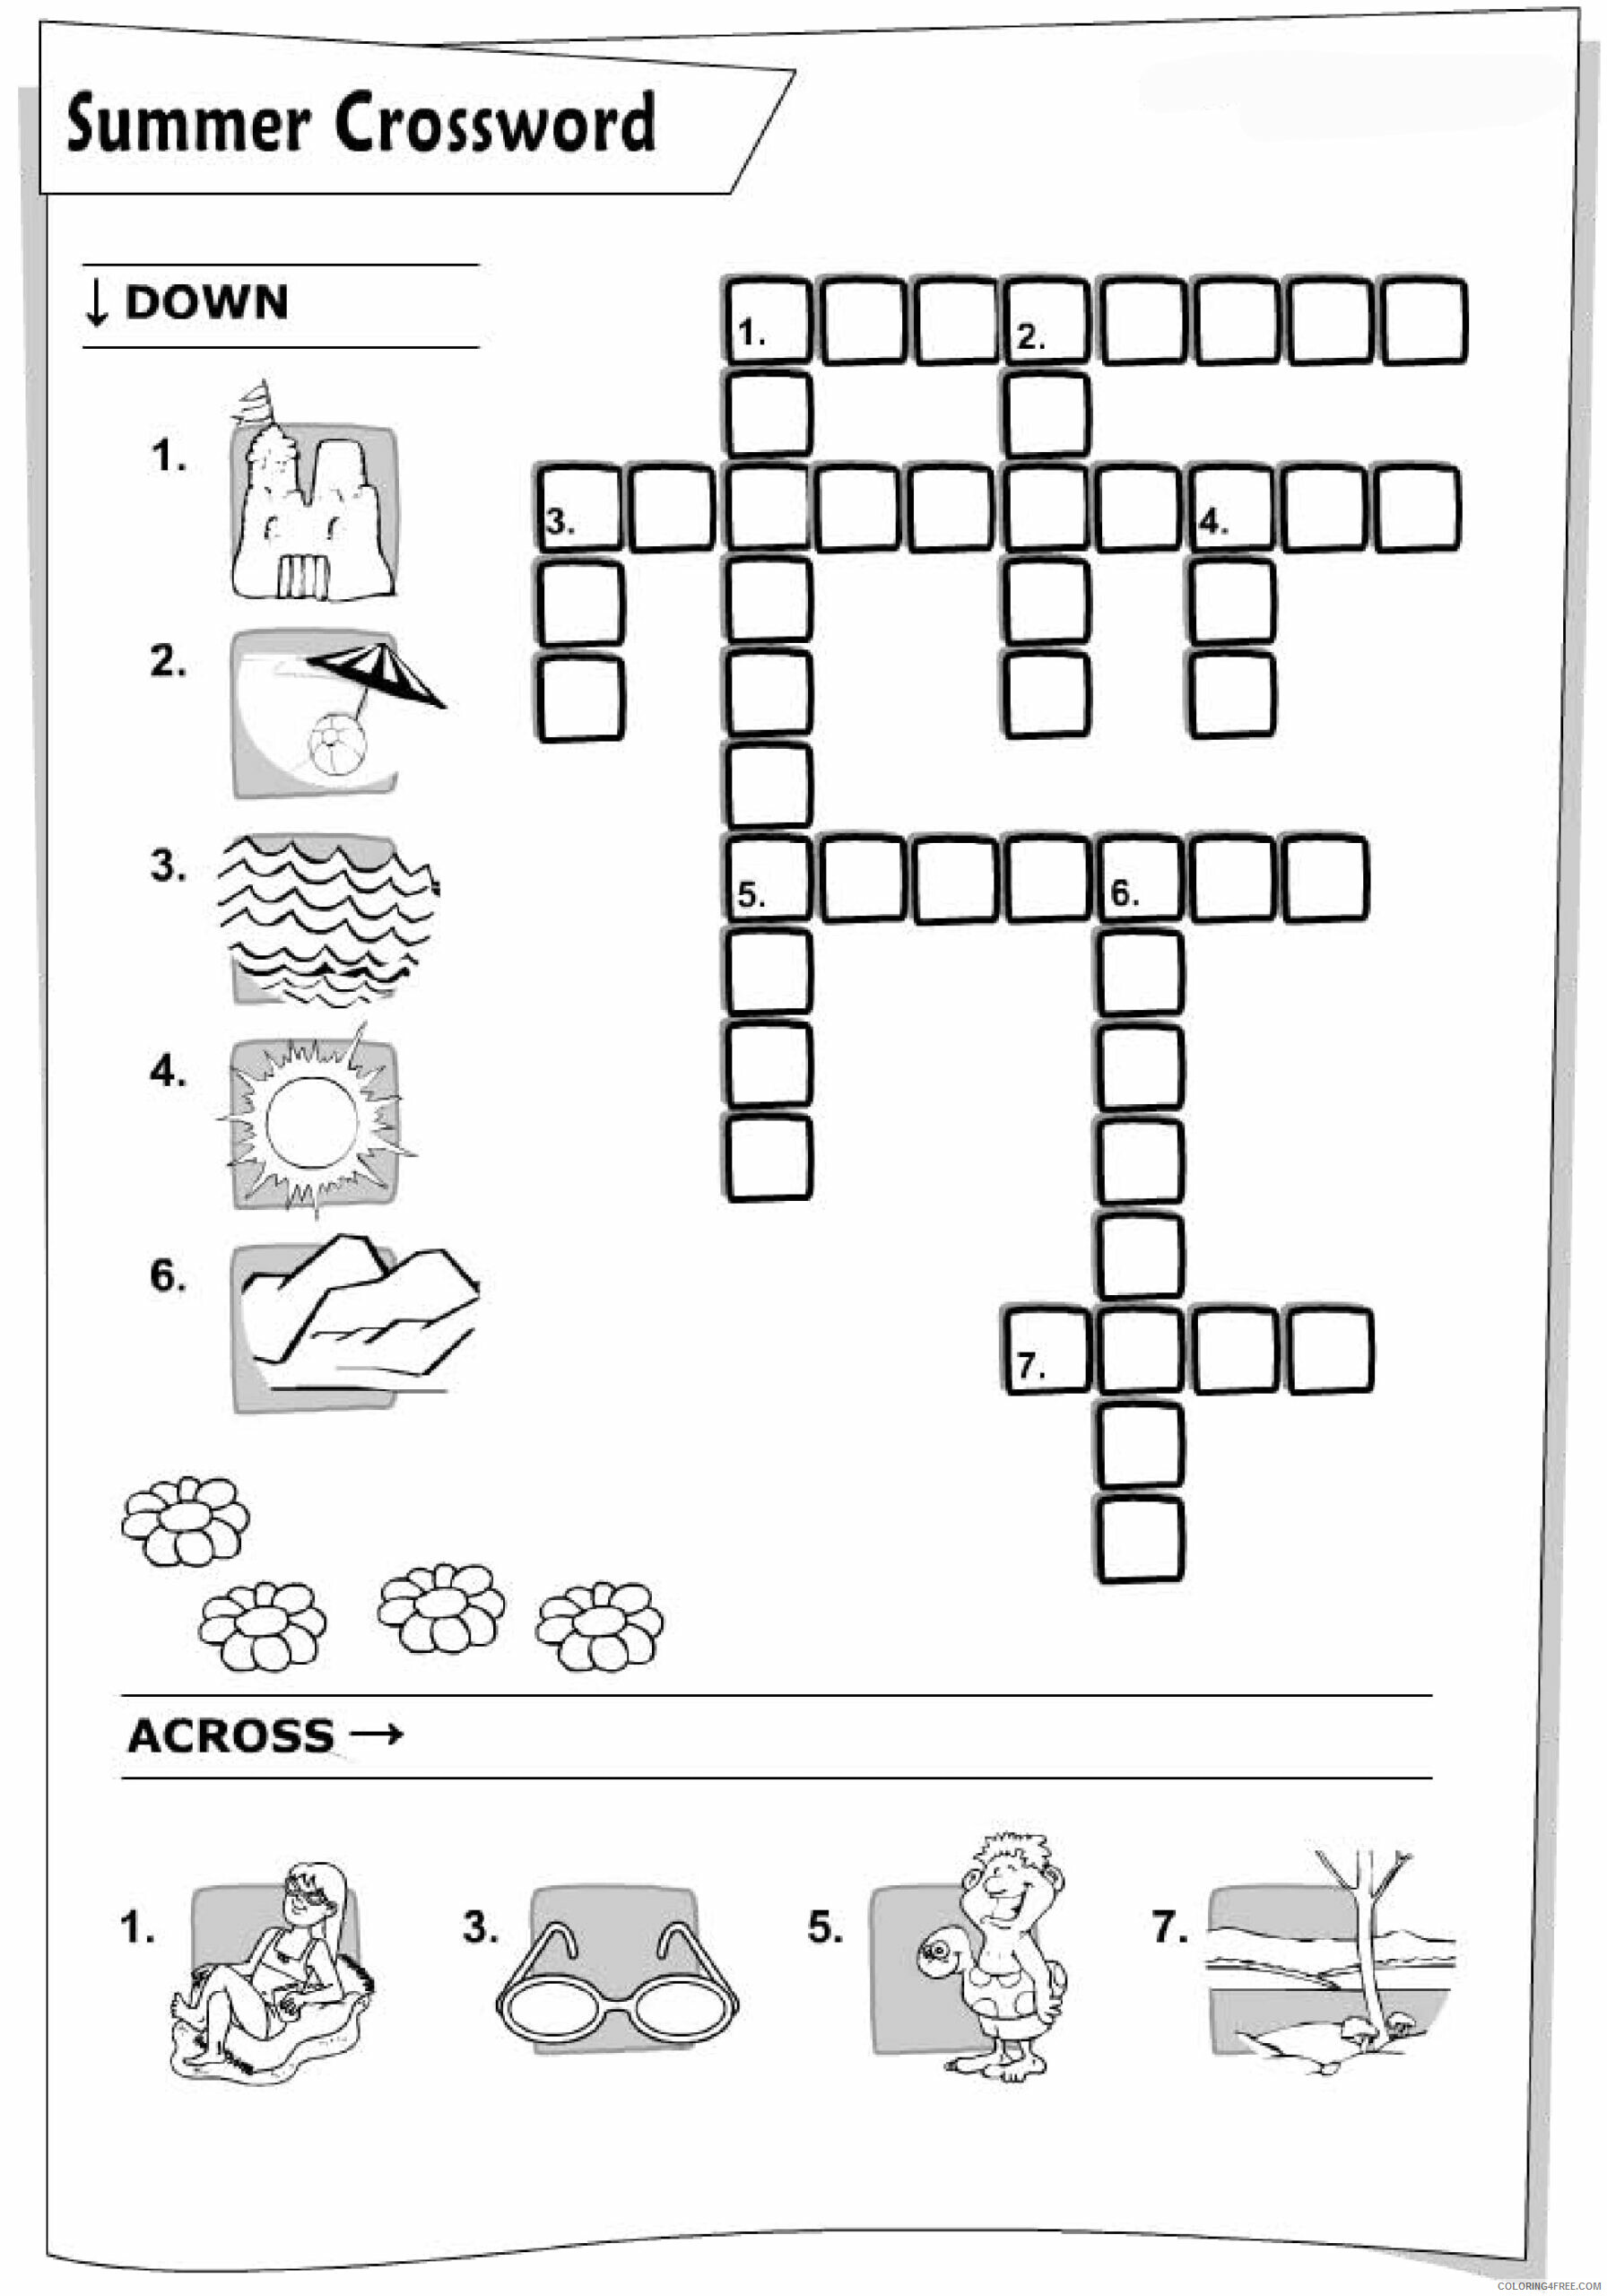 Crossword Puzzle Coloring Pages Summer Crossword Puzzle Printable 2021 1928 Coloring4free Coloring4free Com